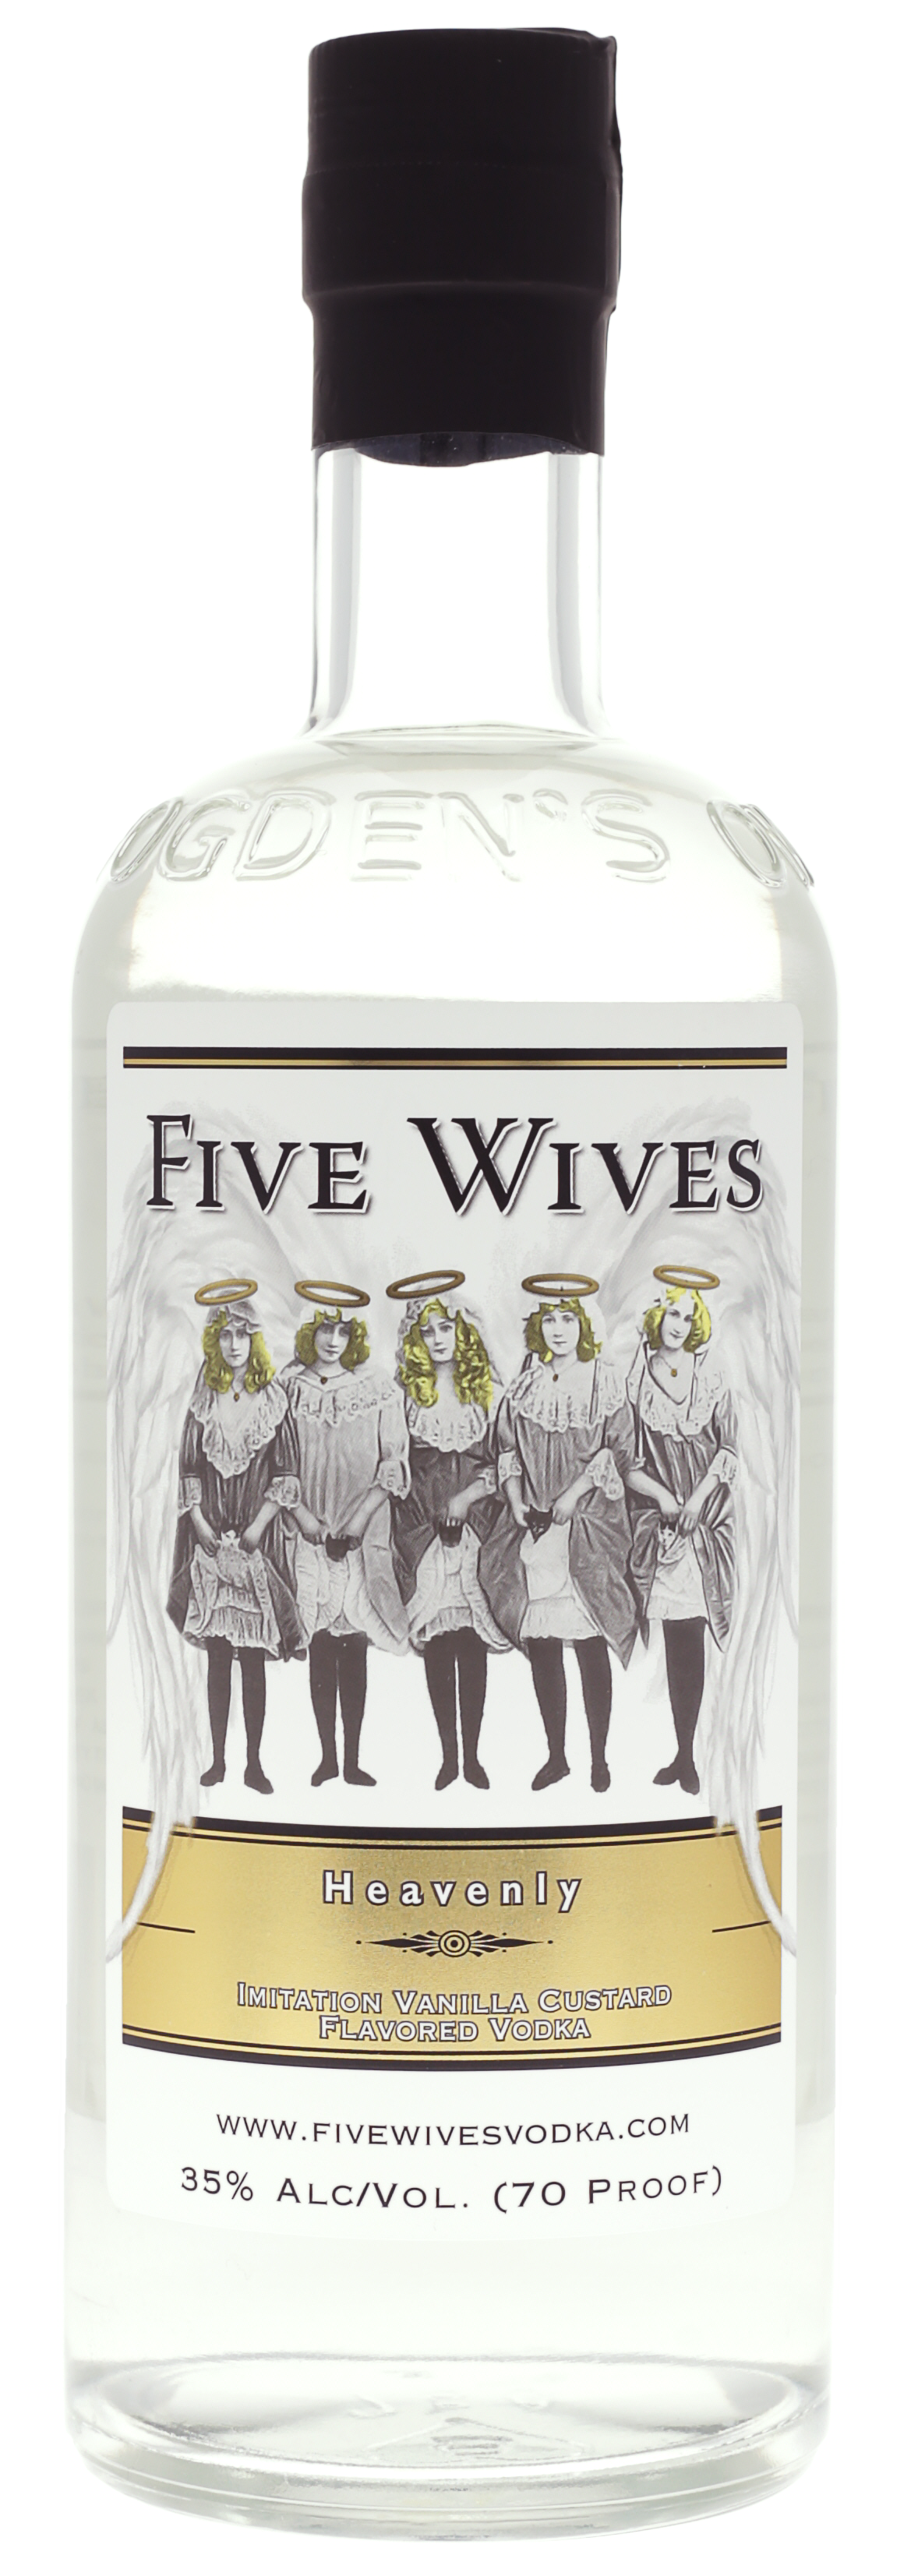 Five Wives Heavenly